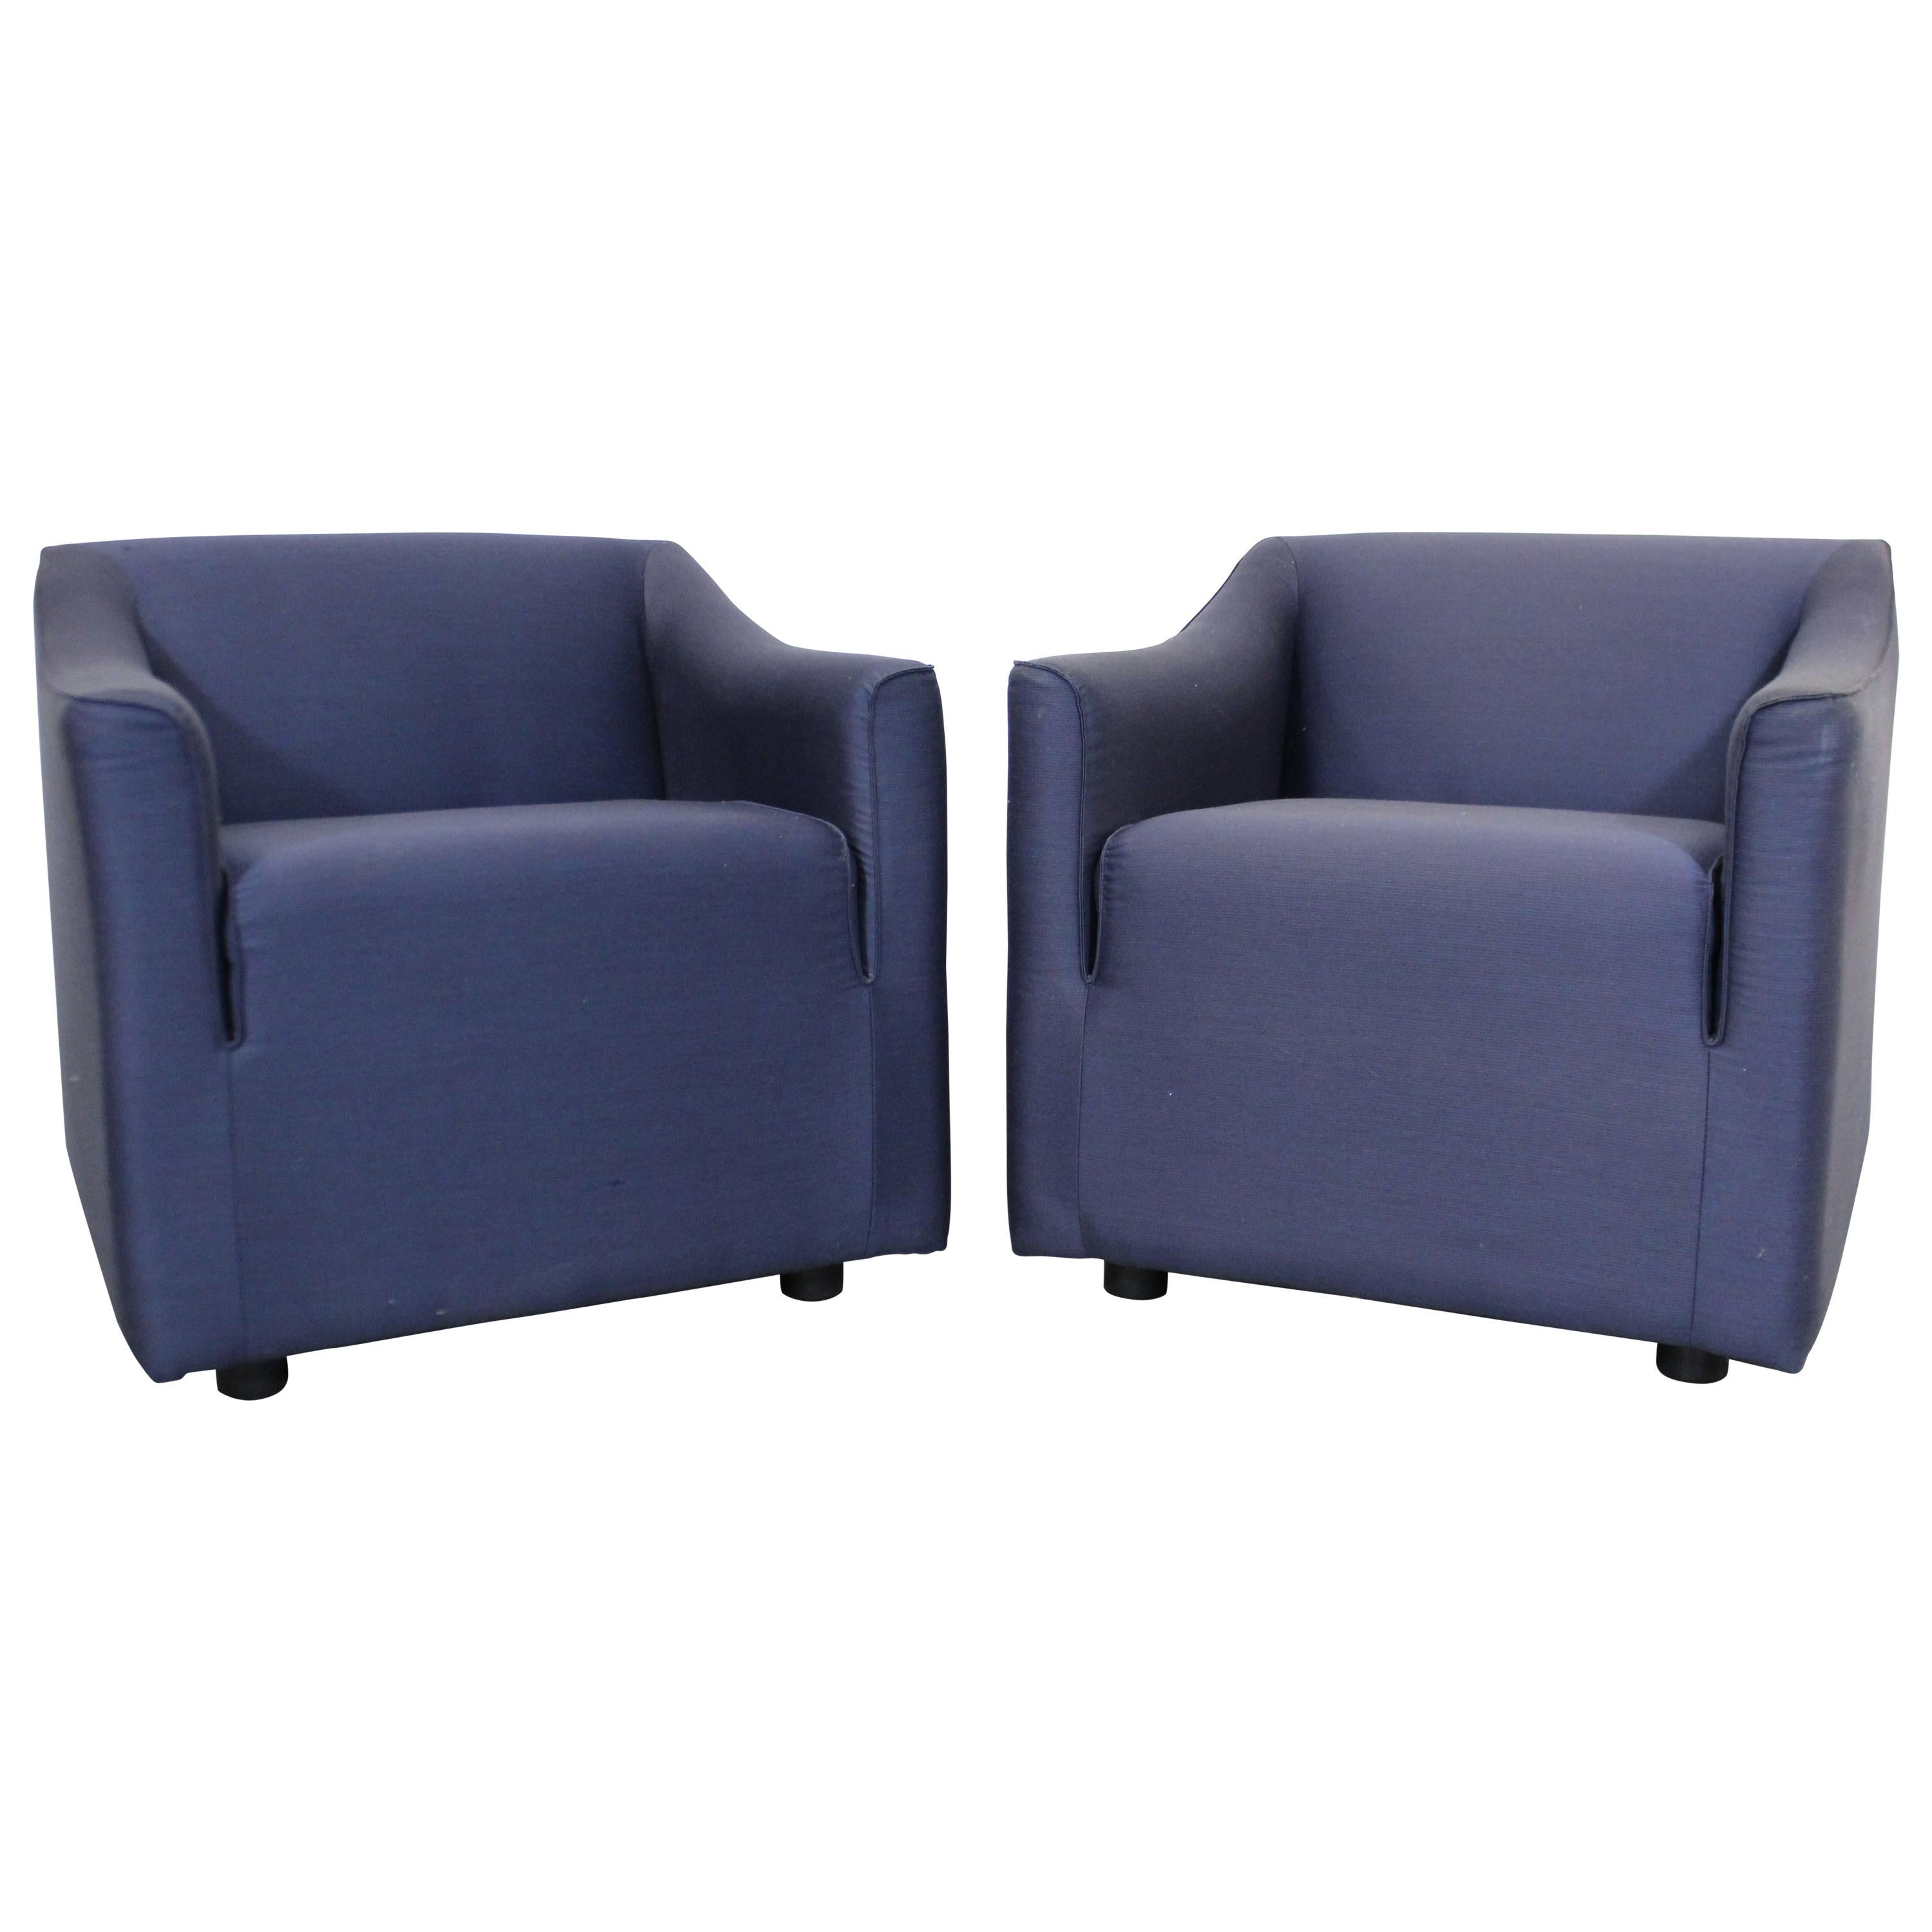 Pair of Vintage Modern Lounge/Club Chairs by Knoll